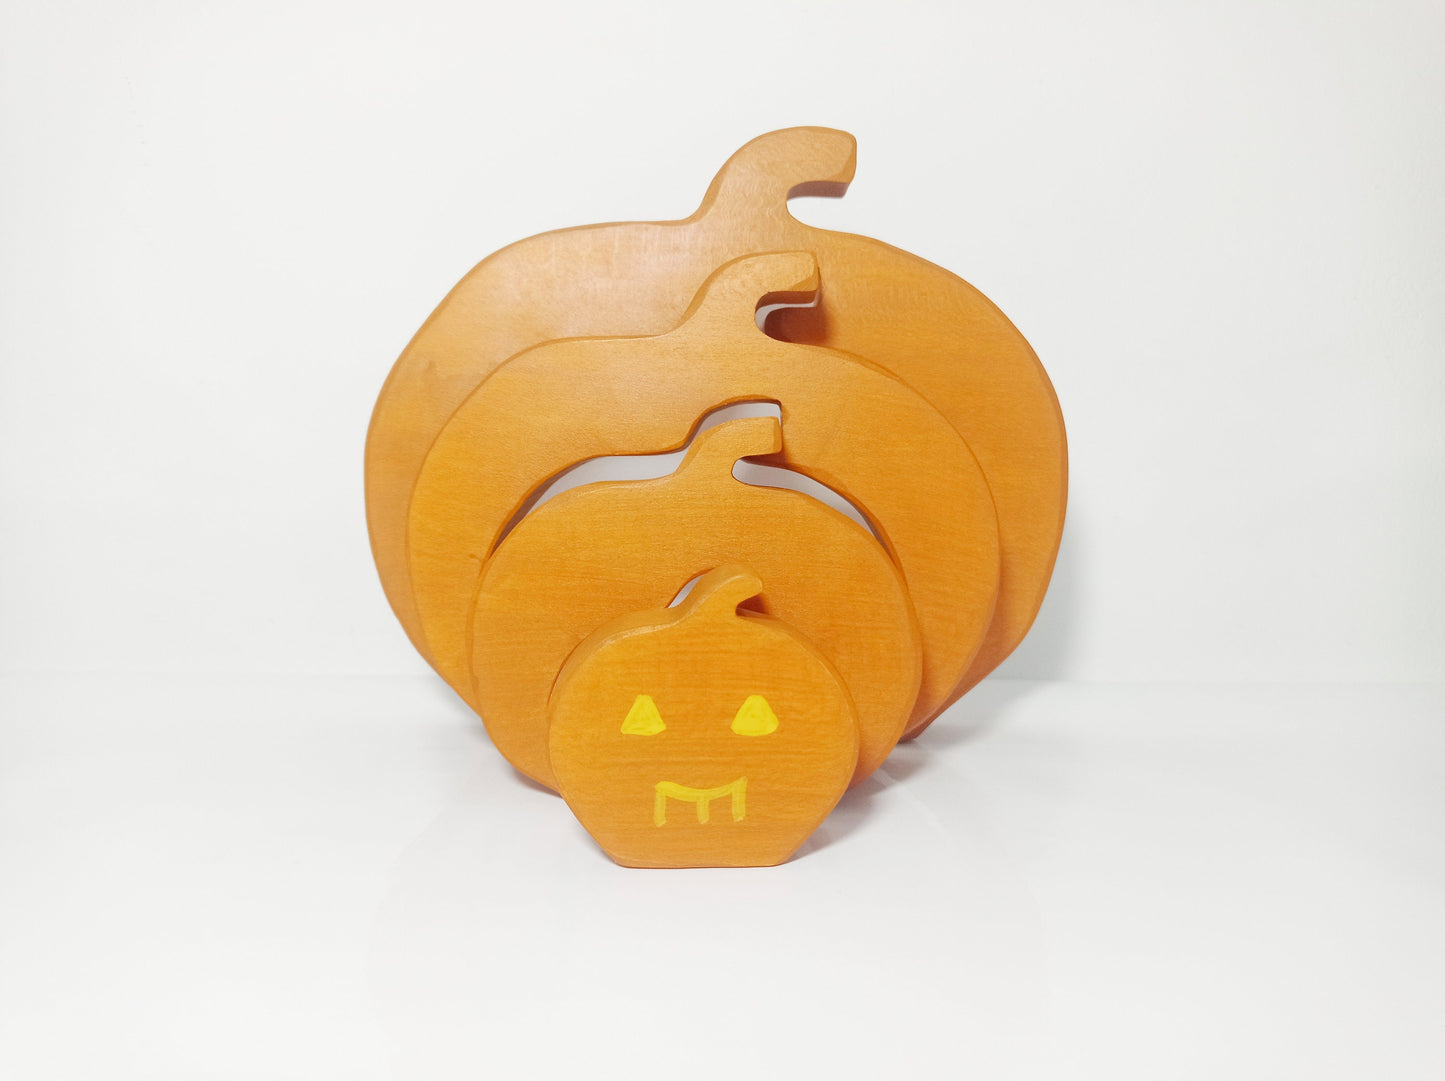 Stacking pumkins wooden toy set, waldorf inspired wooden stacking toy, open ended play, imaginative play, christmas birthday gift for kids,